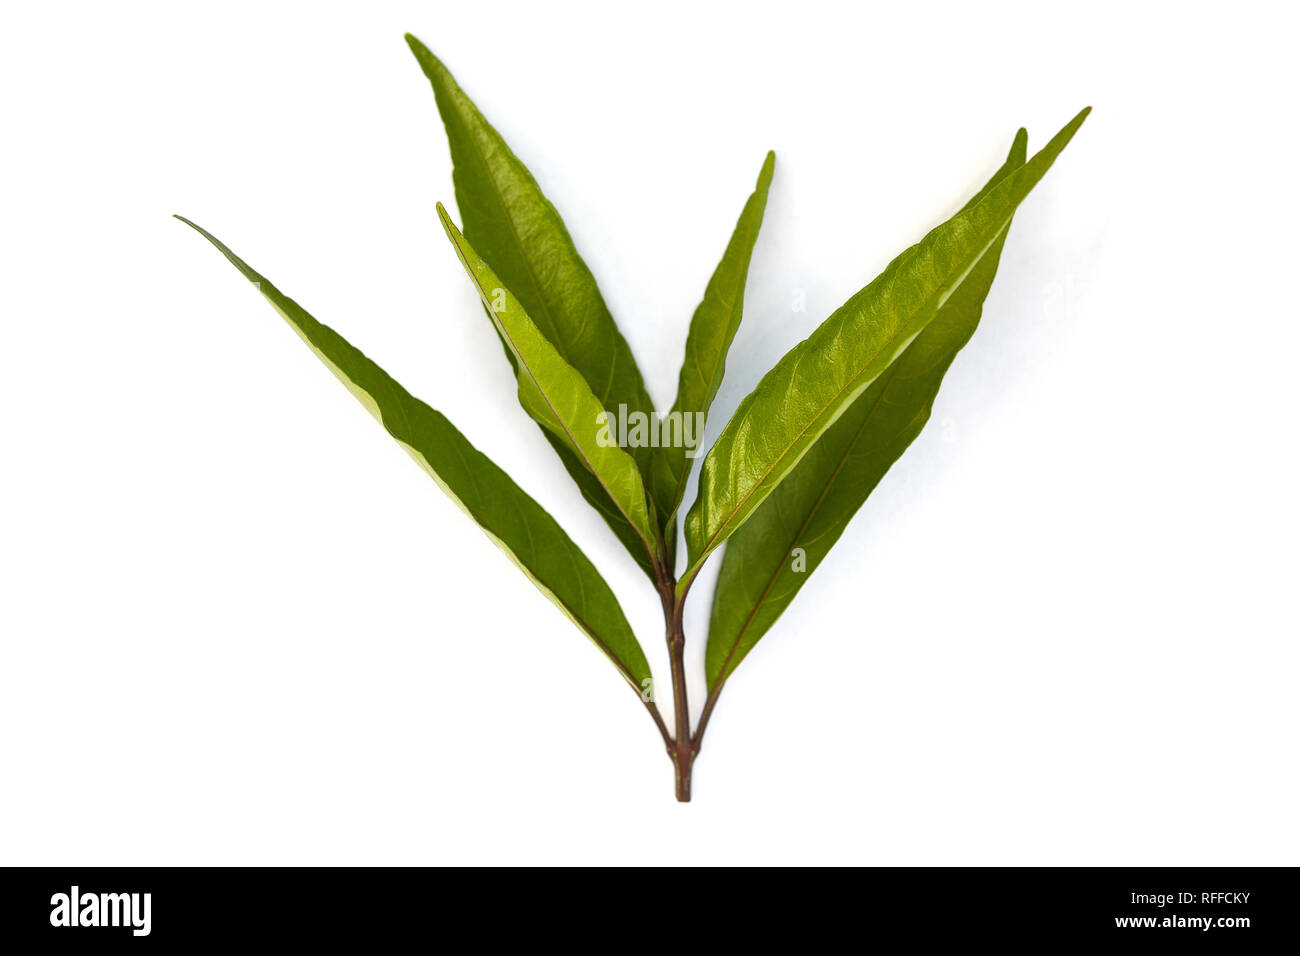 Willow-leaved Justicia medicine flower leaves isolated on white background from above. Stock Photo